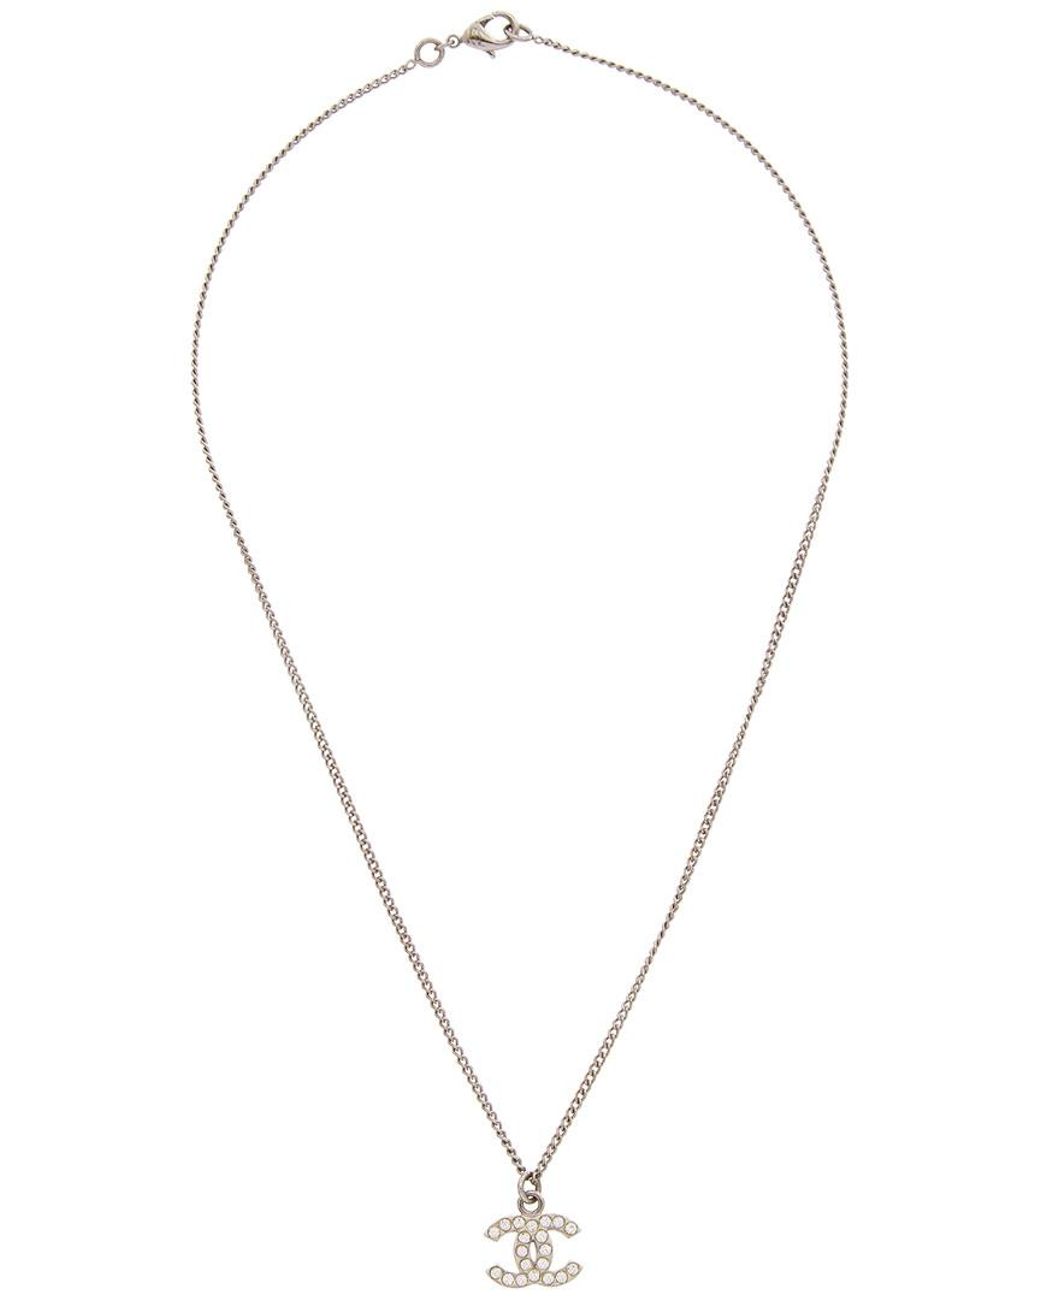 CHANEL Pearl Crystal CC Pendant Necklace Gold, FASHIONPHILE